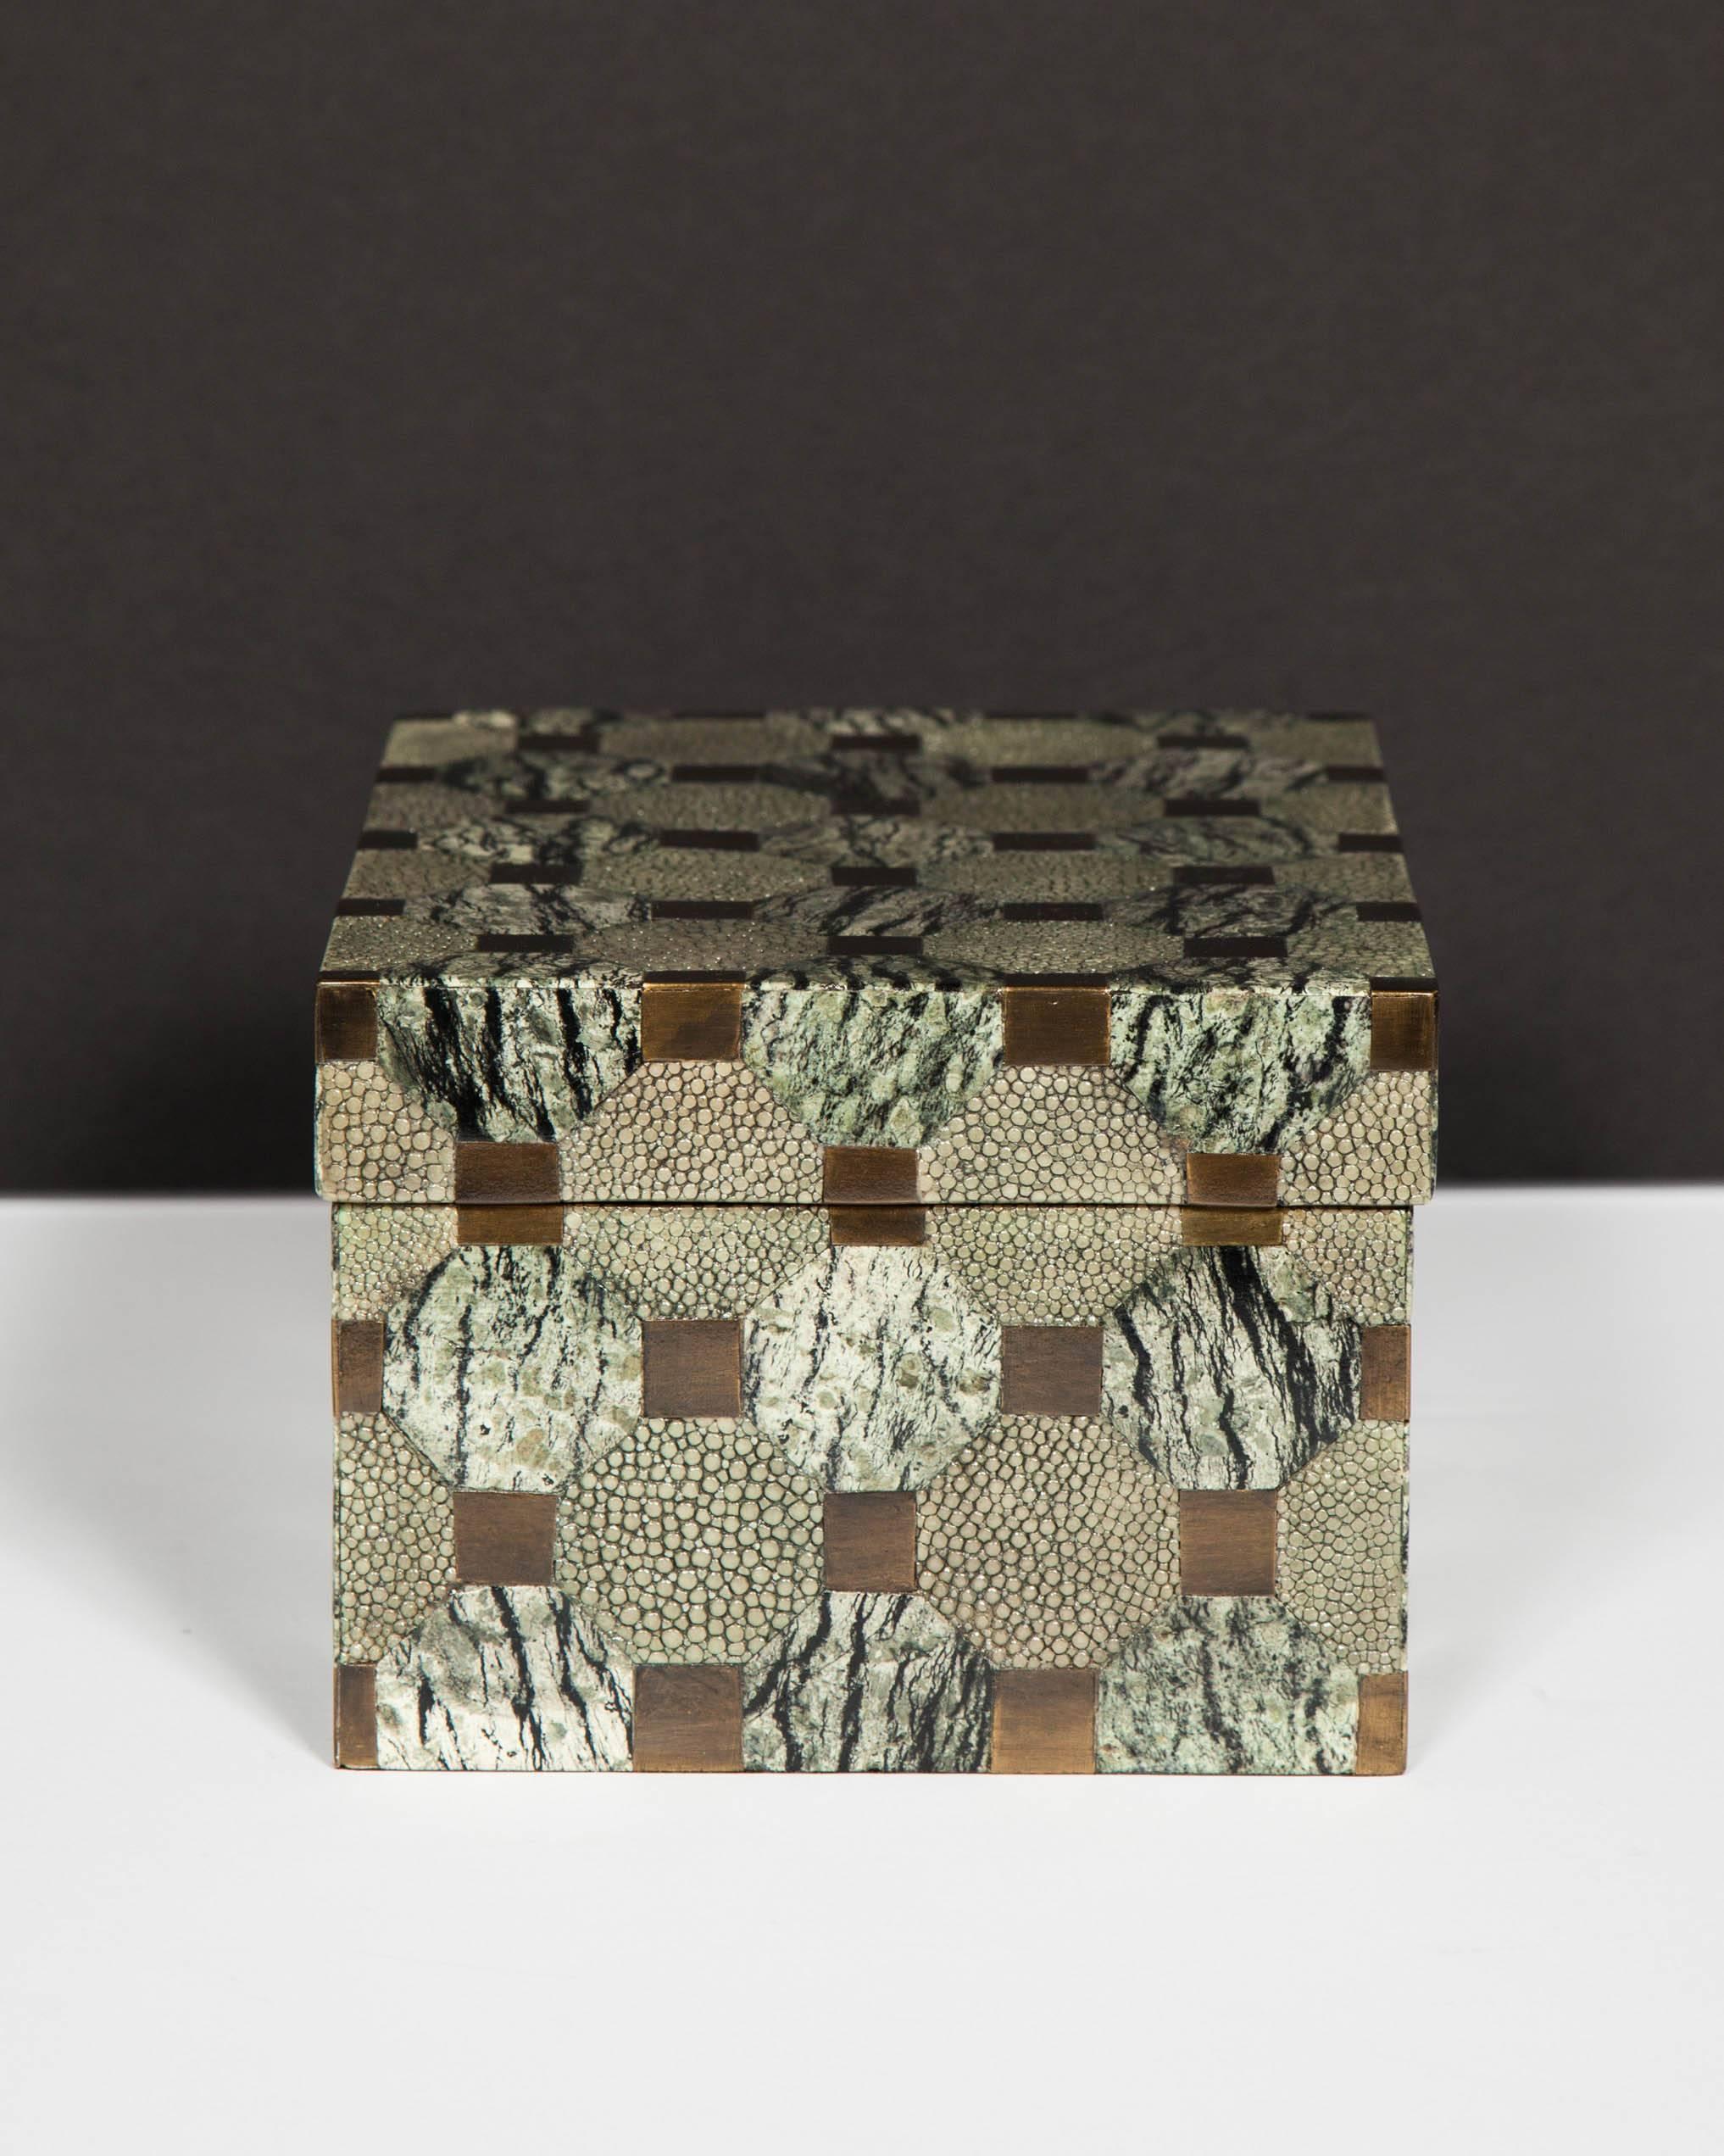 Hand-Crafted Exceptional Shagreen and Bronze Box with Geometric Design